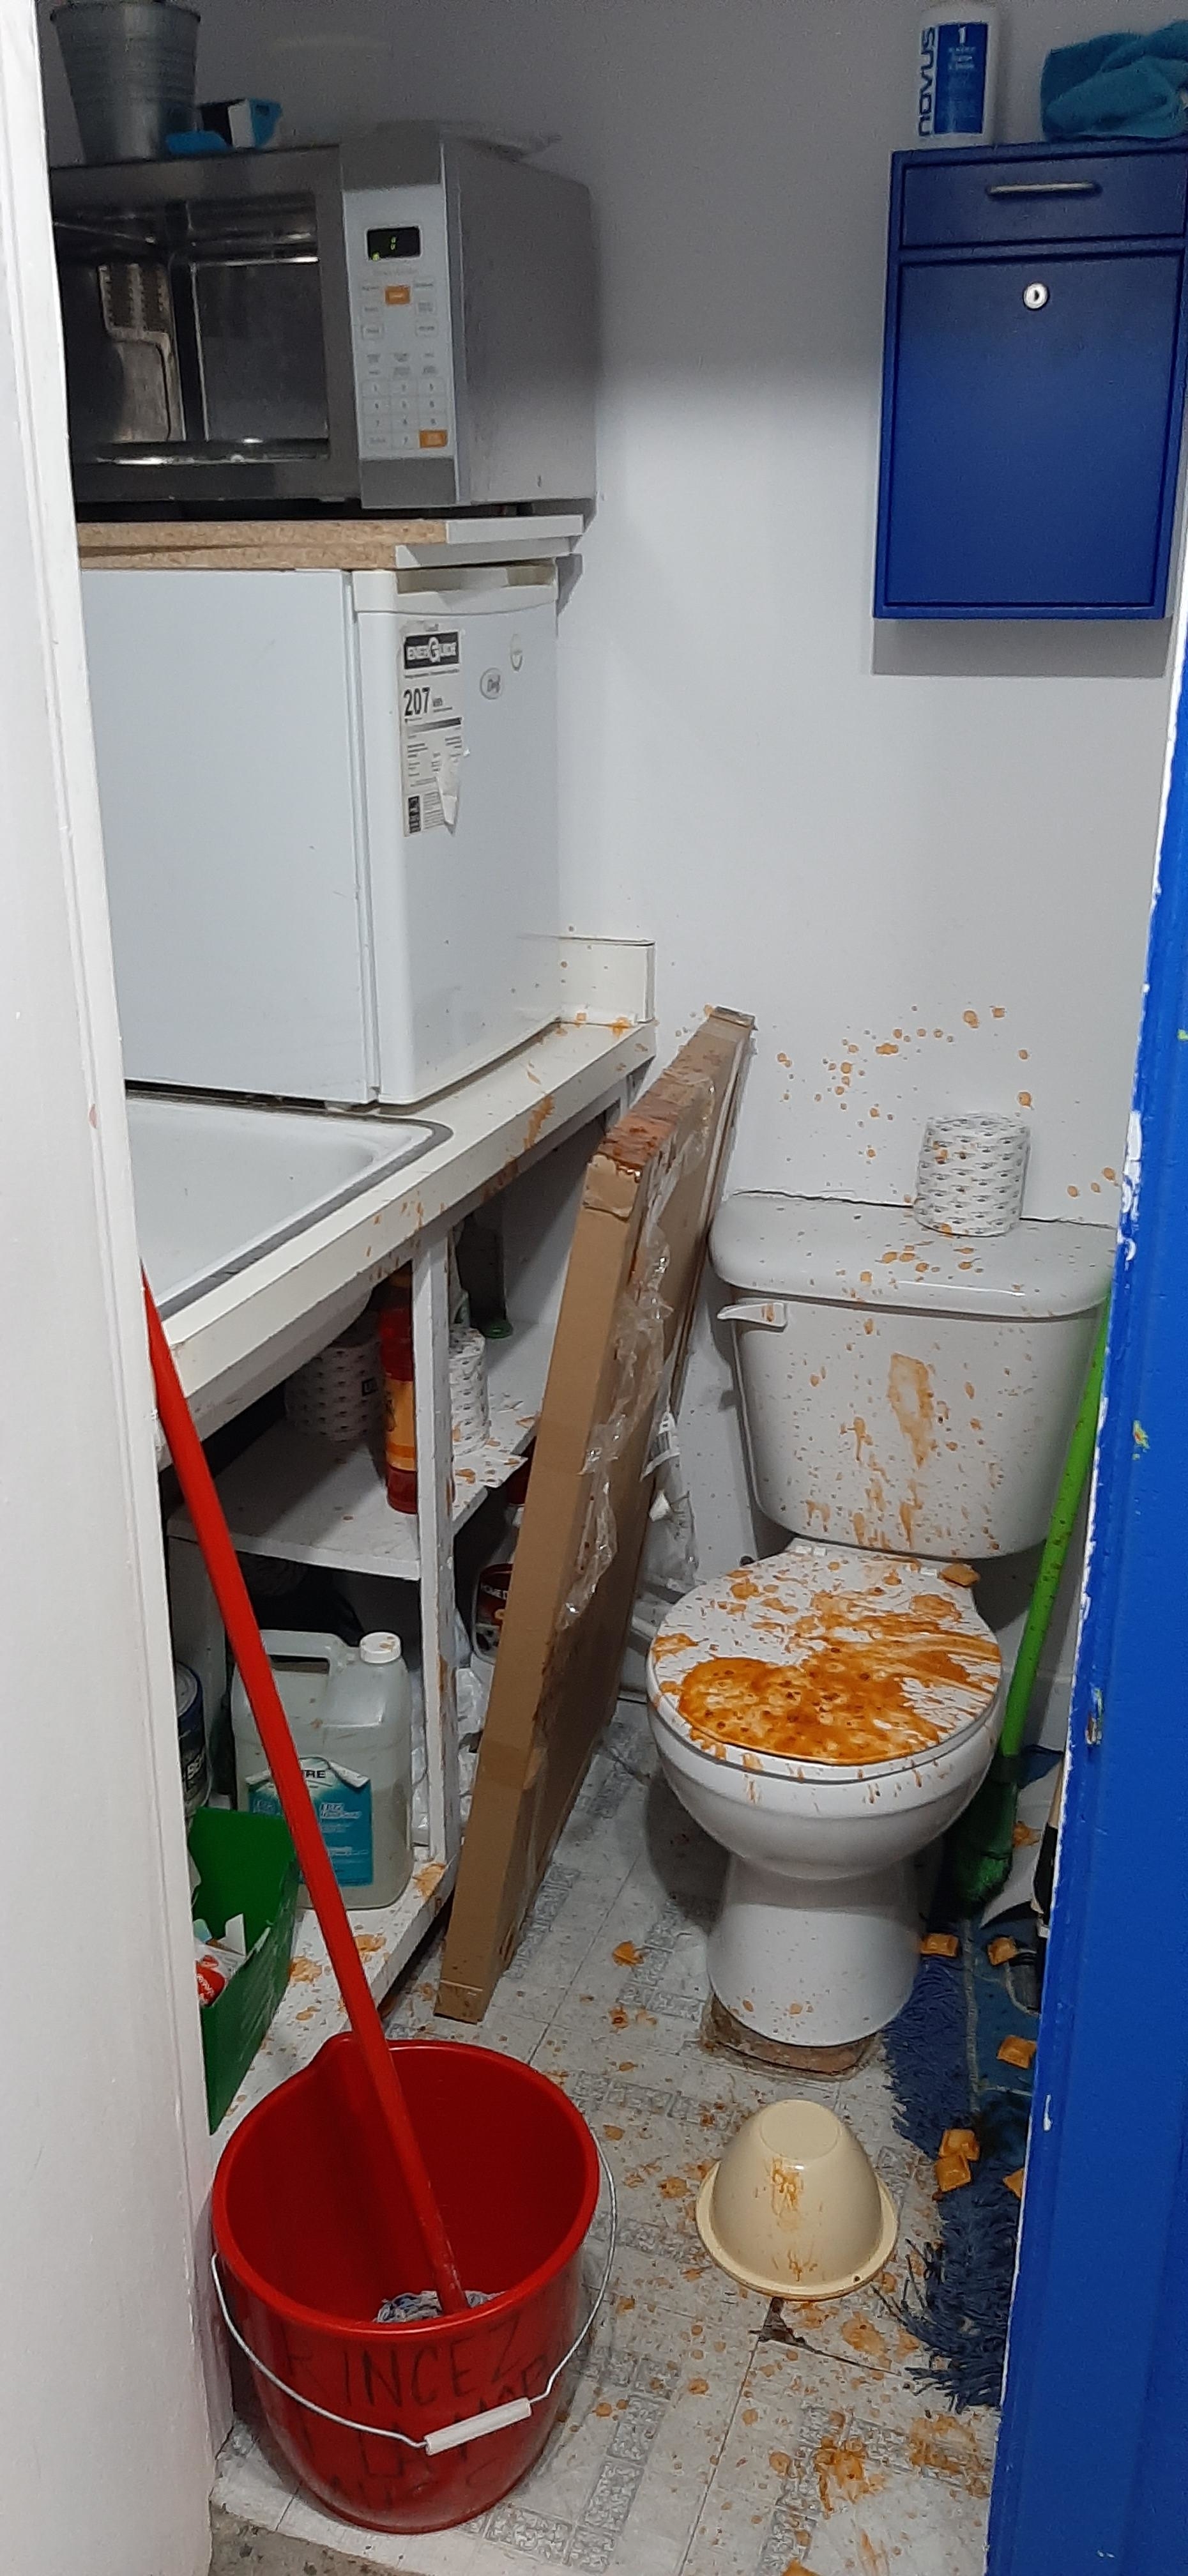 A small room that has a mini fridge and microwave stacked on a counter. There is a toilet next to the counter that is splattered with ravioli sauce